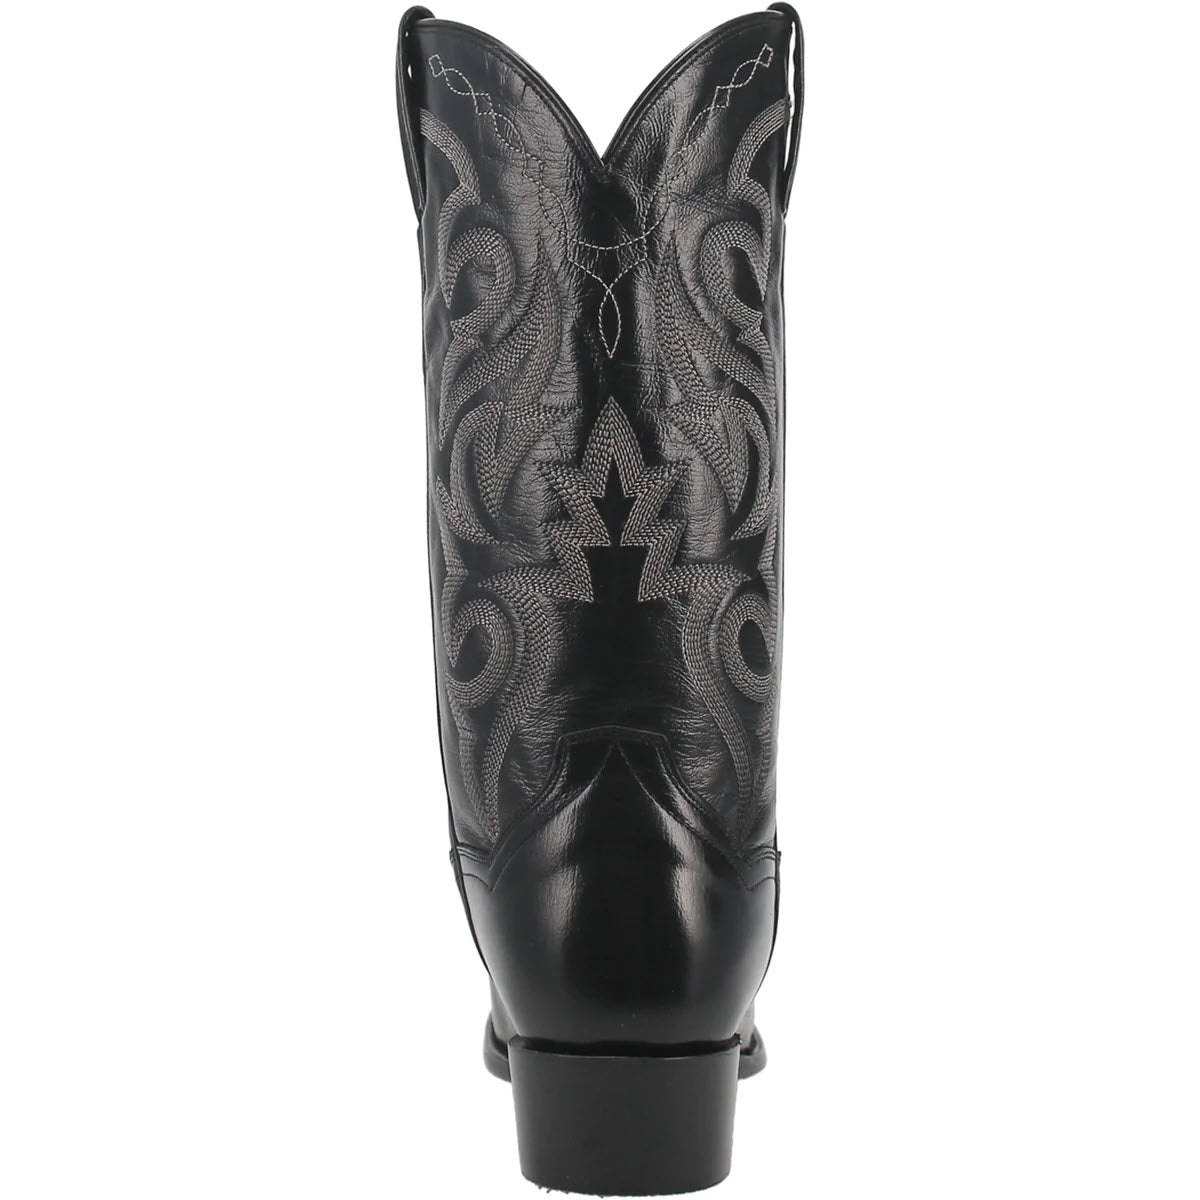 Black Dan Post Milwaukee 13 inch Western boot viewed from the front, featuring intricate grey stitching on its shaft and a smooth, polished toe.